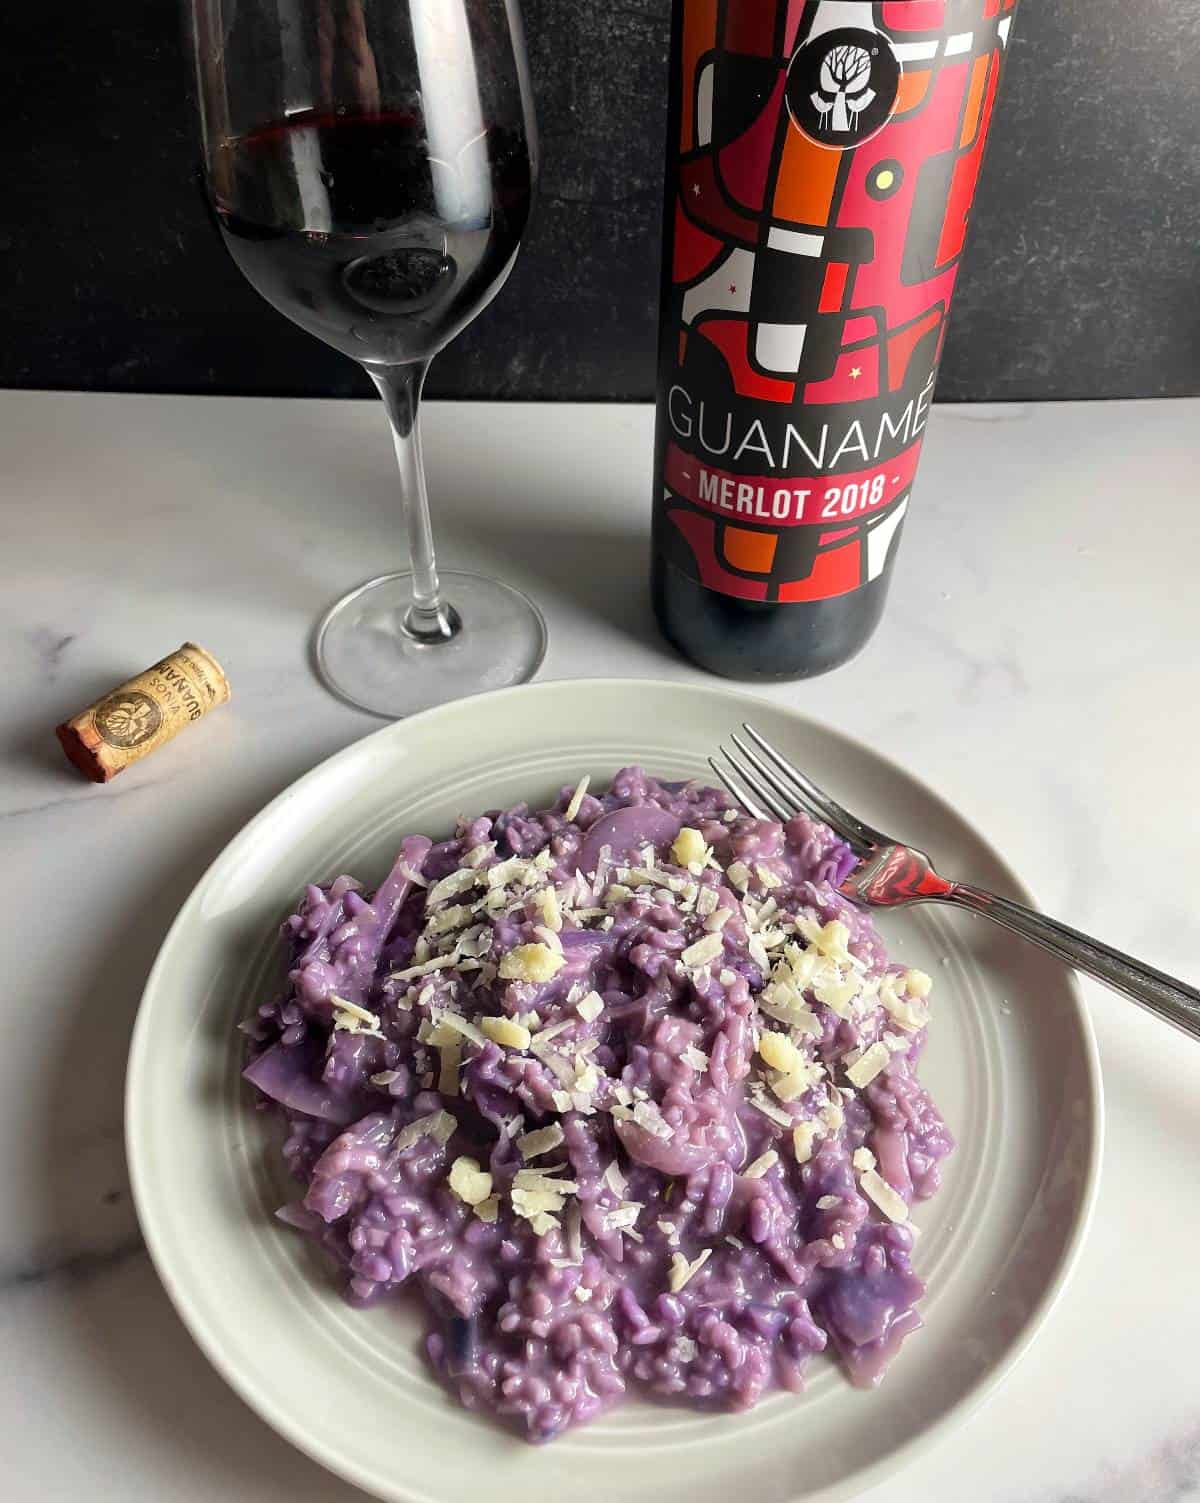 red cabbage risotto served with a Merlot red wine.